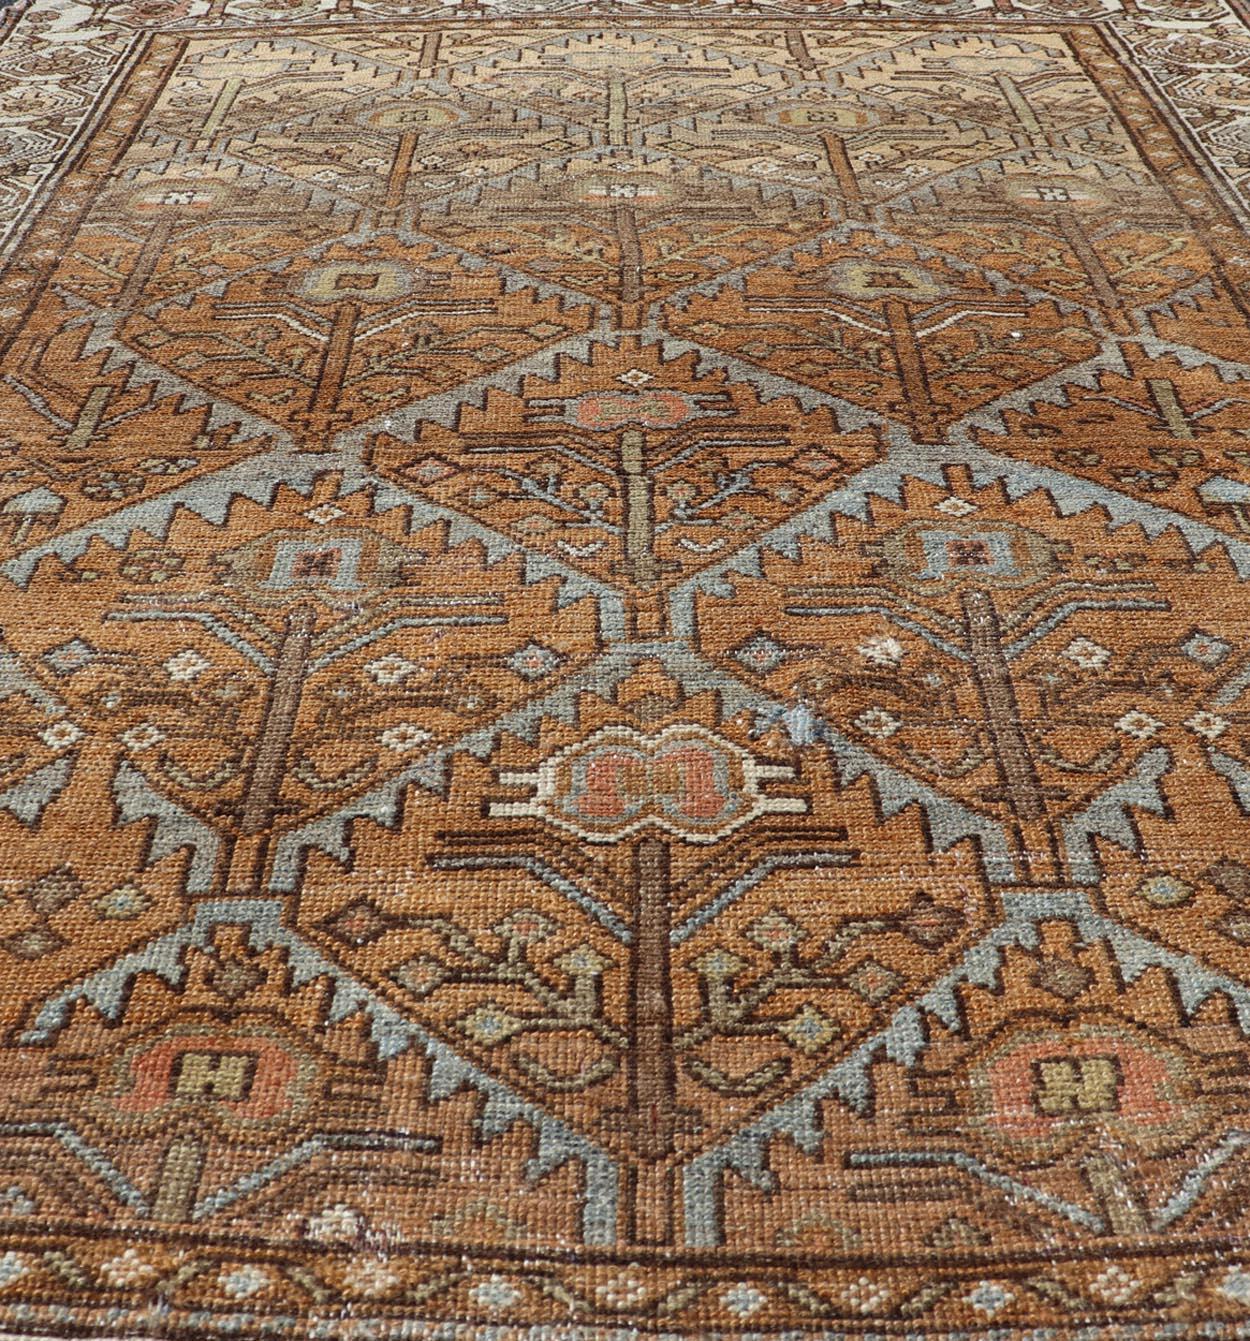 20th Century Antique Persian Malayer in Rustic Earthy Tones With All-Over Tribal Medallions